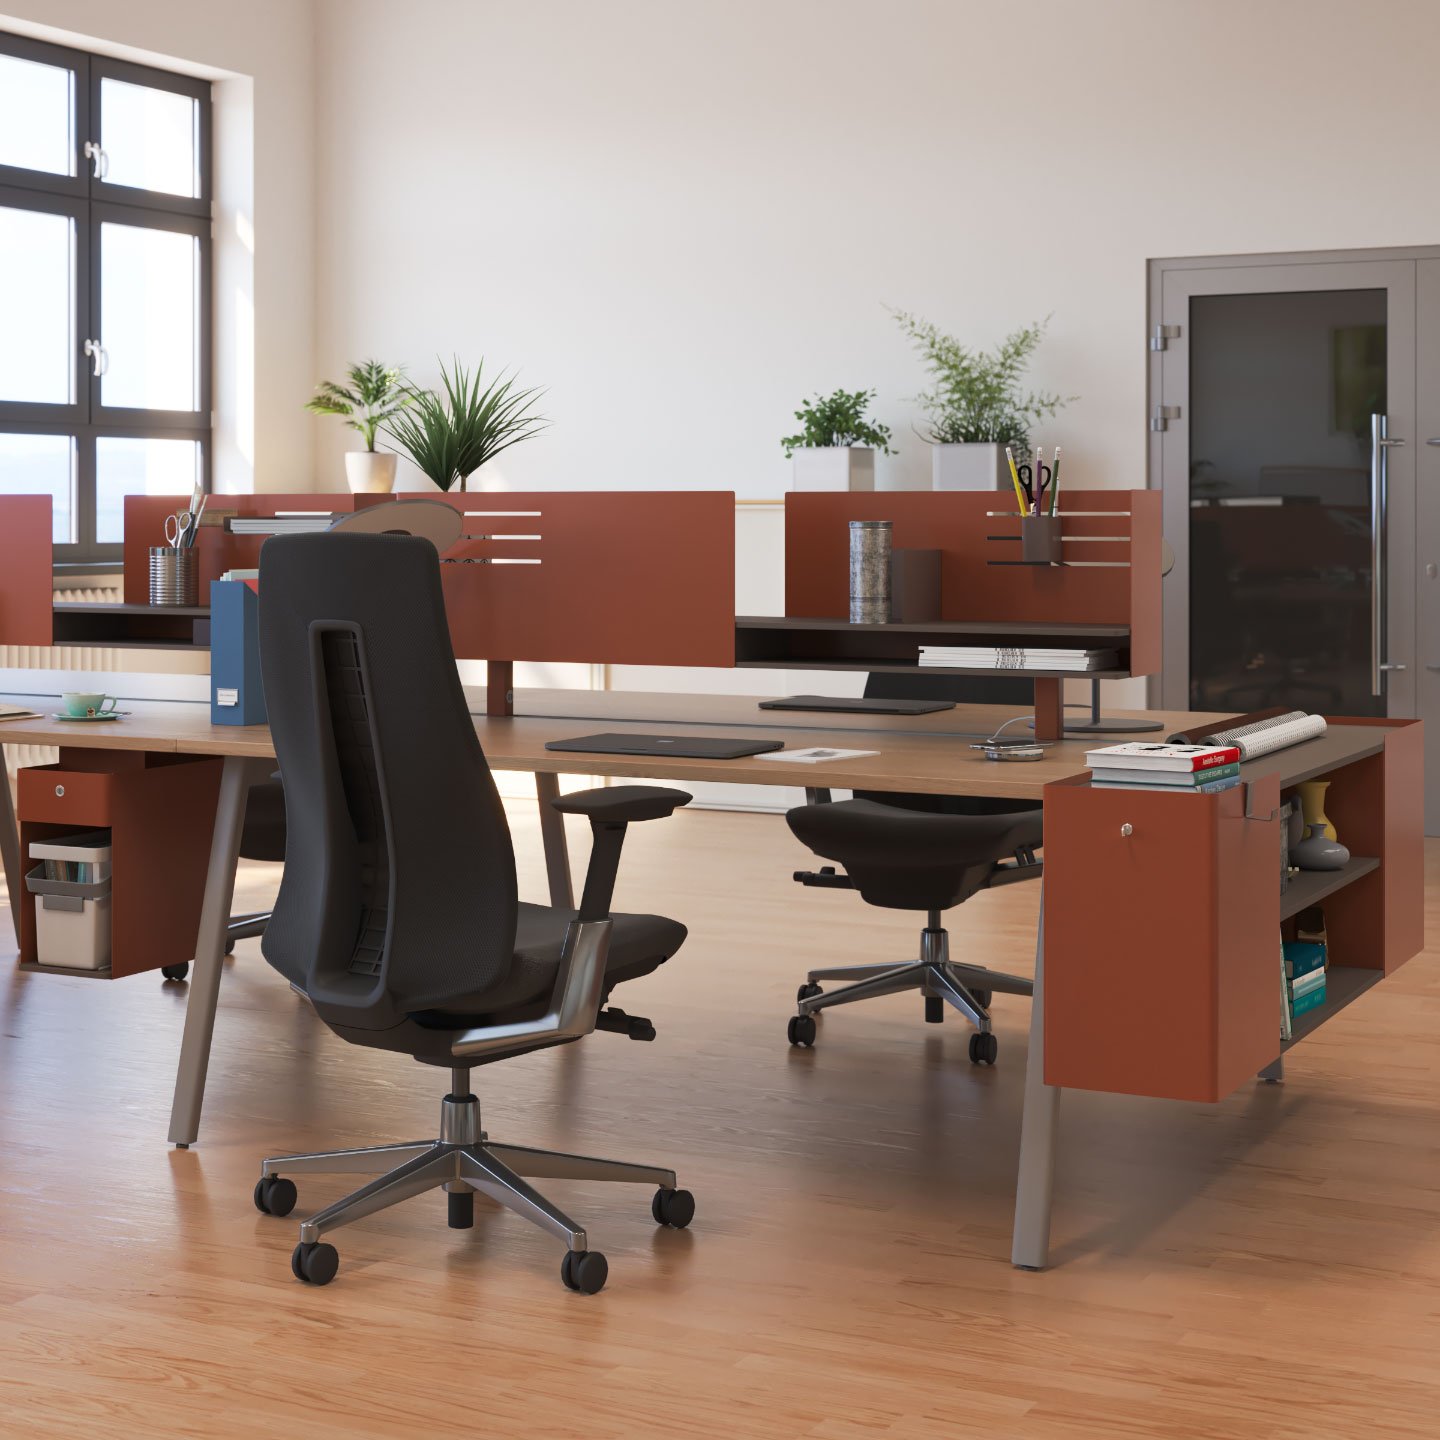 Active Components shelving and drawers at individual workspace with Fern chair in black.